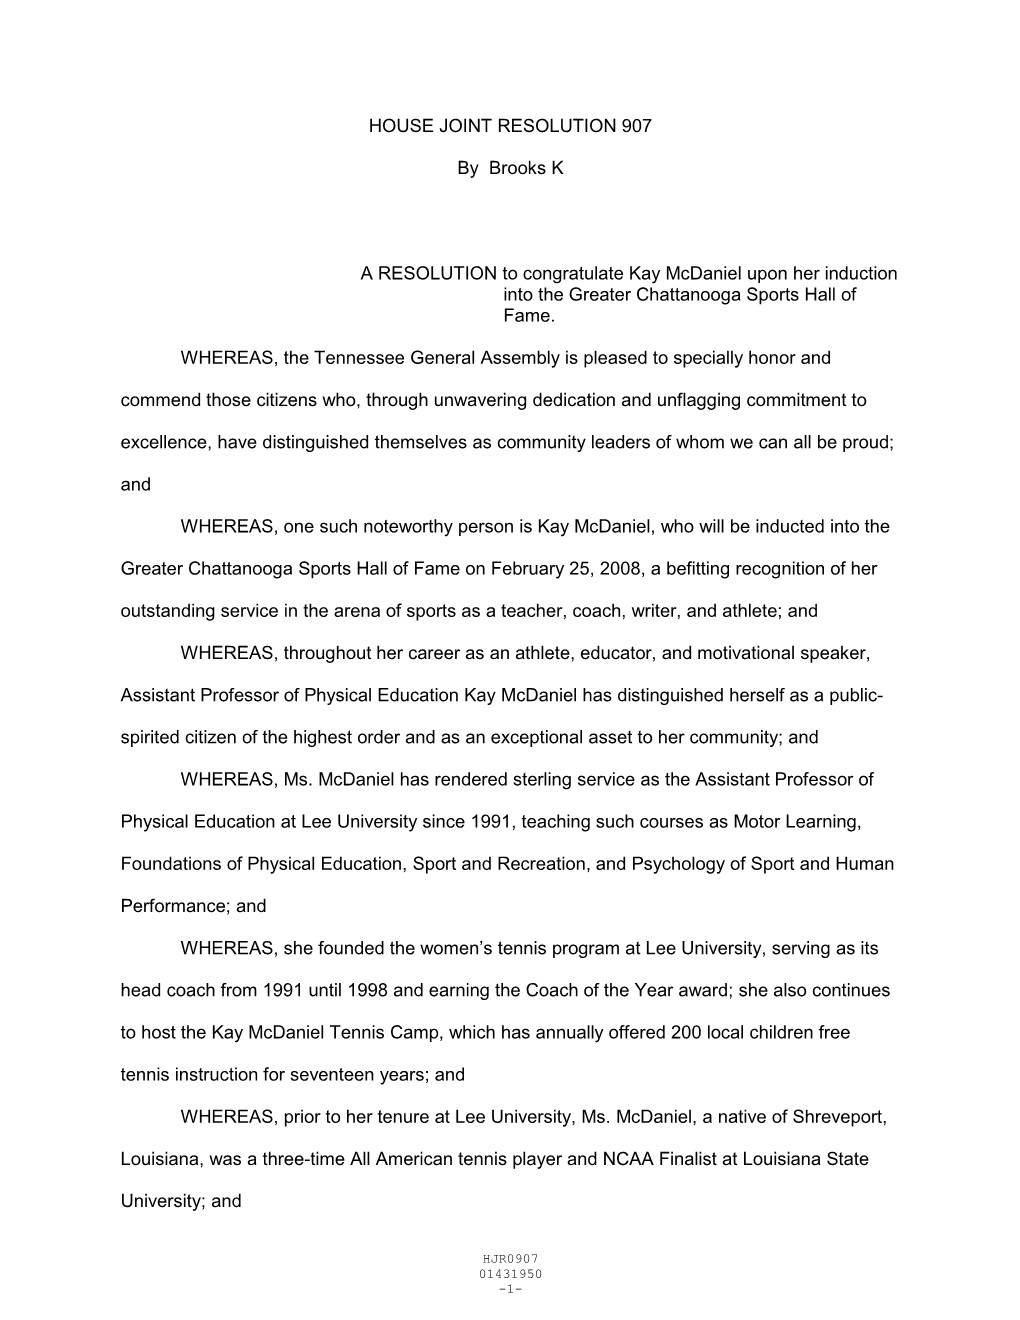 HOUSE JOINT RESOLUTION 907 by Brooks K a RESOLUTION To